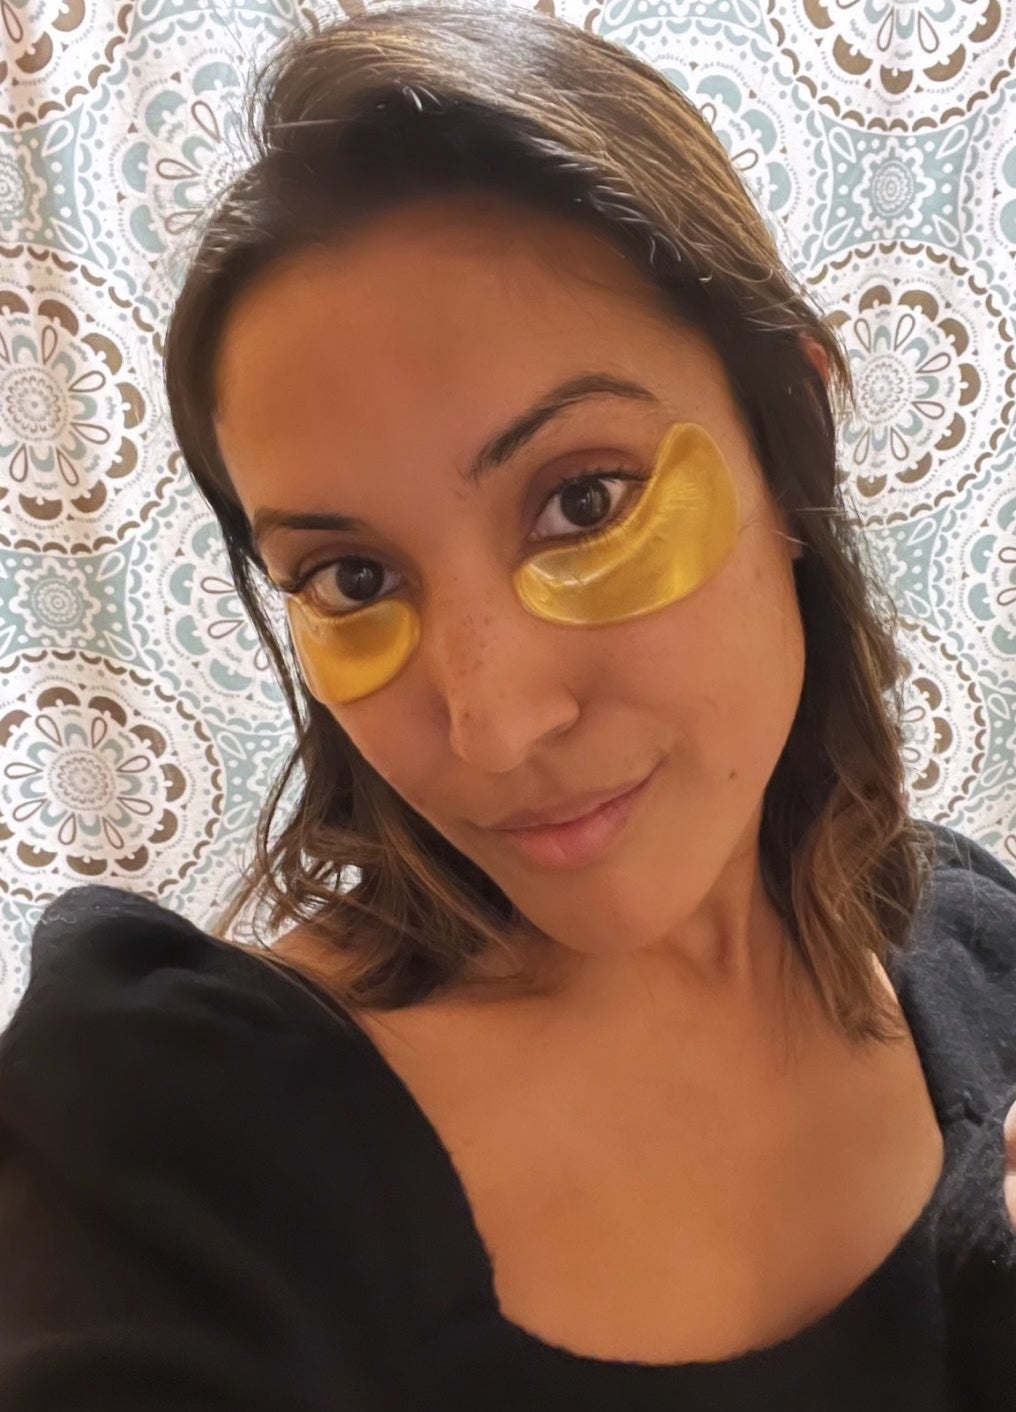 buzzfeed writer with gold eye masks on